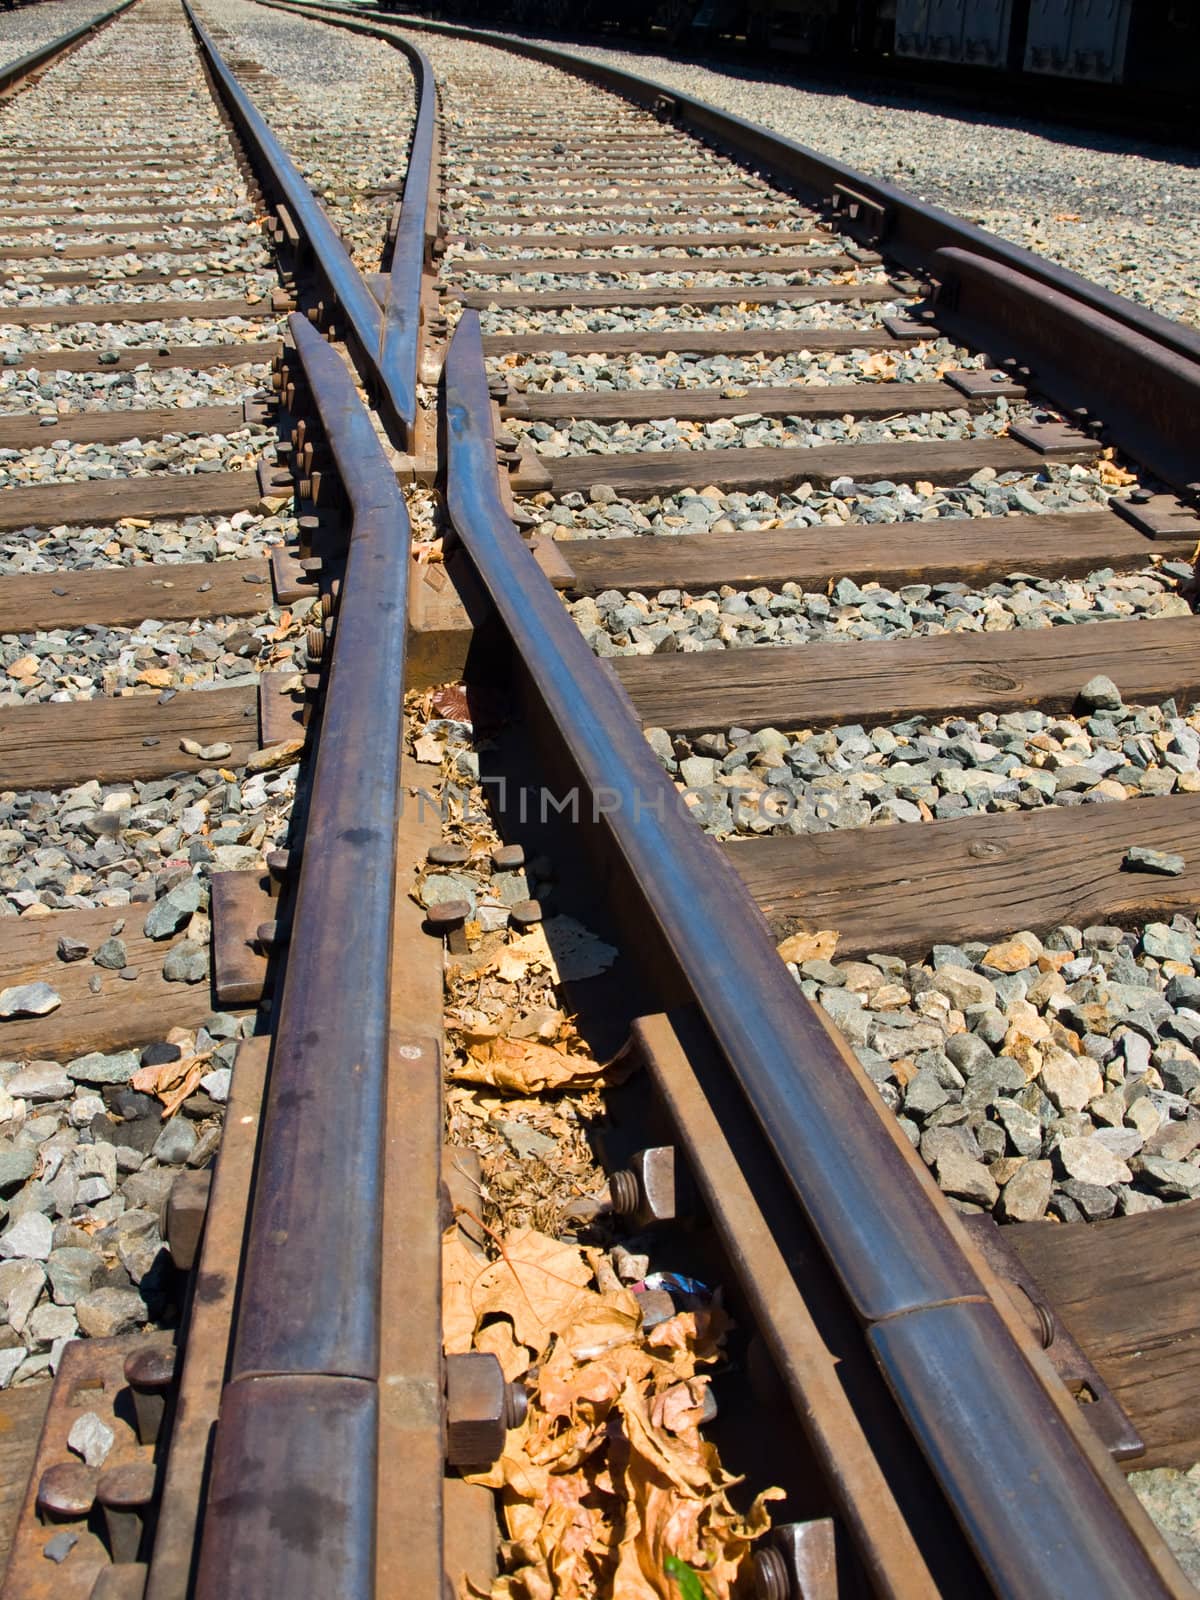 Old Railroad Tracks at a Junction on a Sunny Day